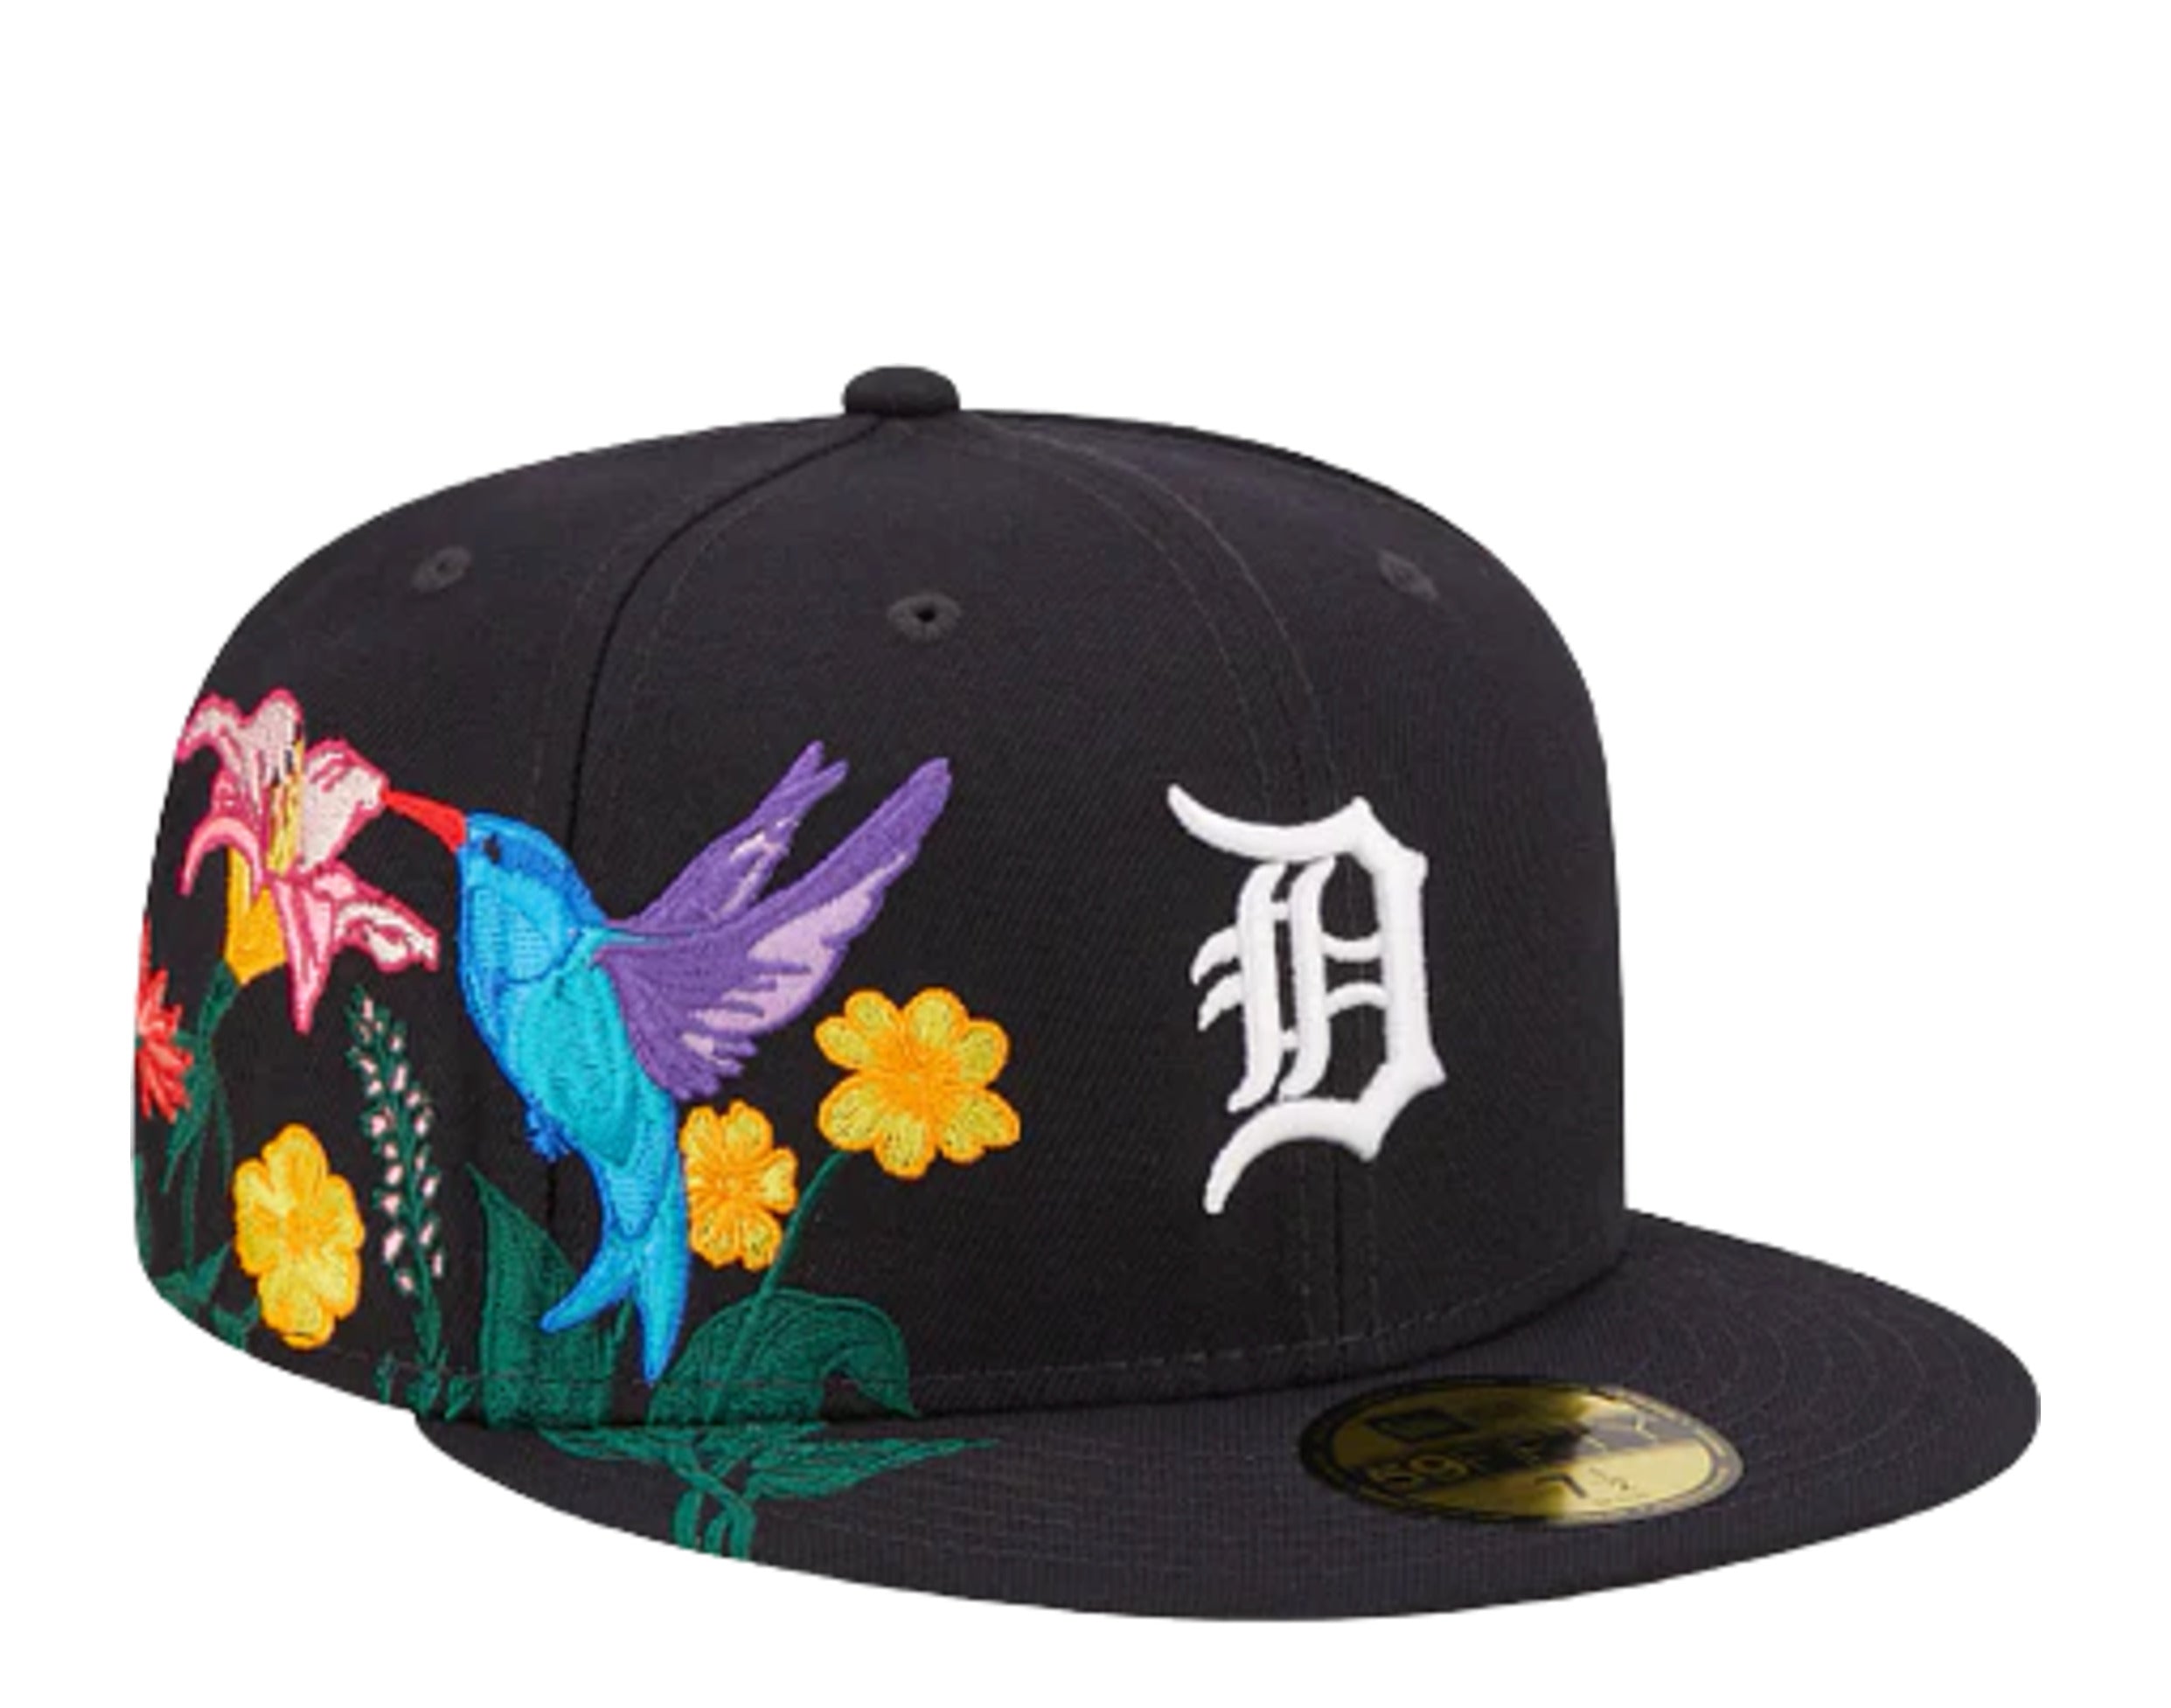 Official New Era Detroit Tigers MLB Butterfly Gold 59FIFTY Fitted Cap  B5239_259 B5239_259 B5239_259